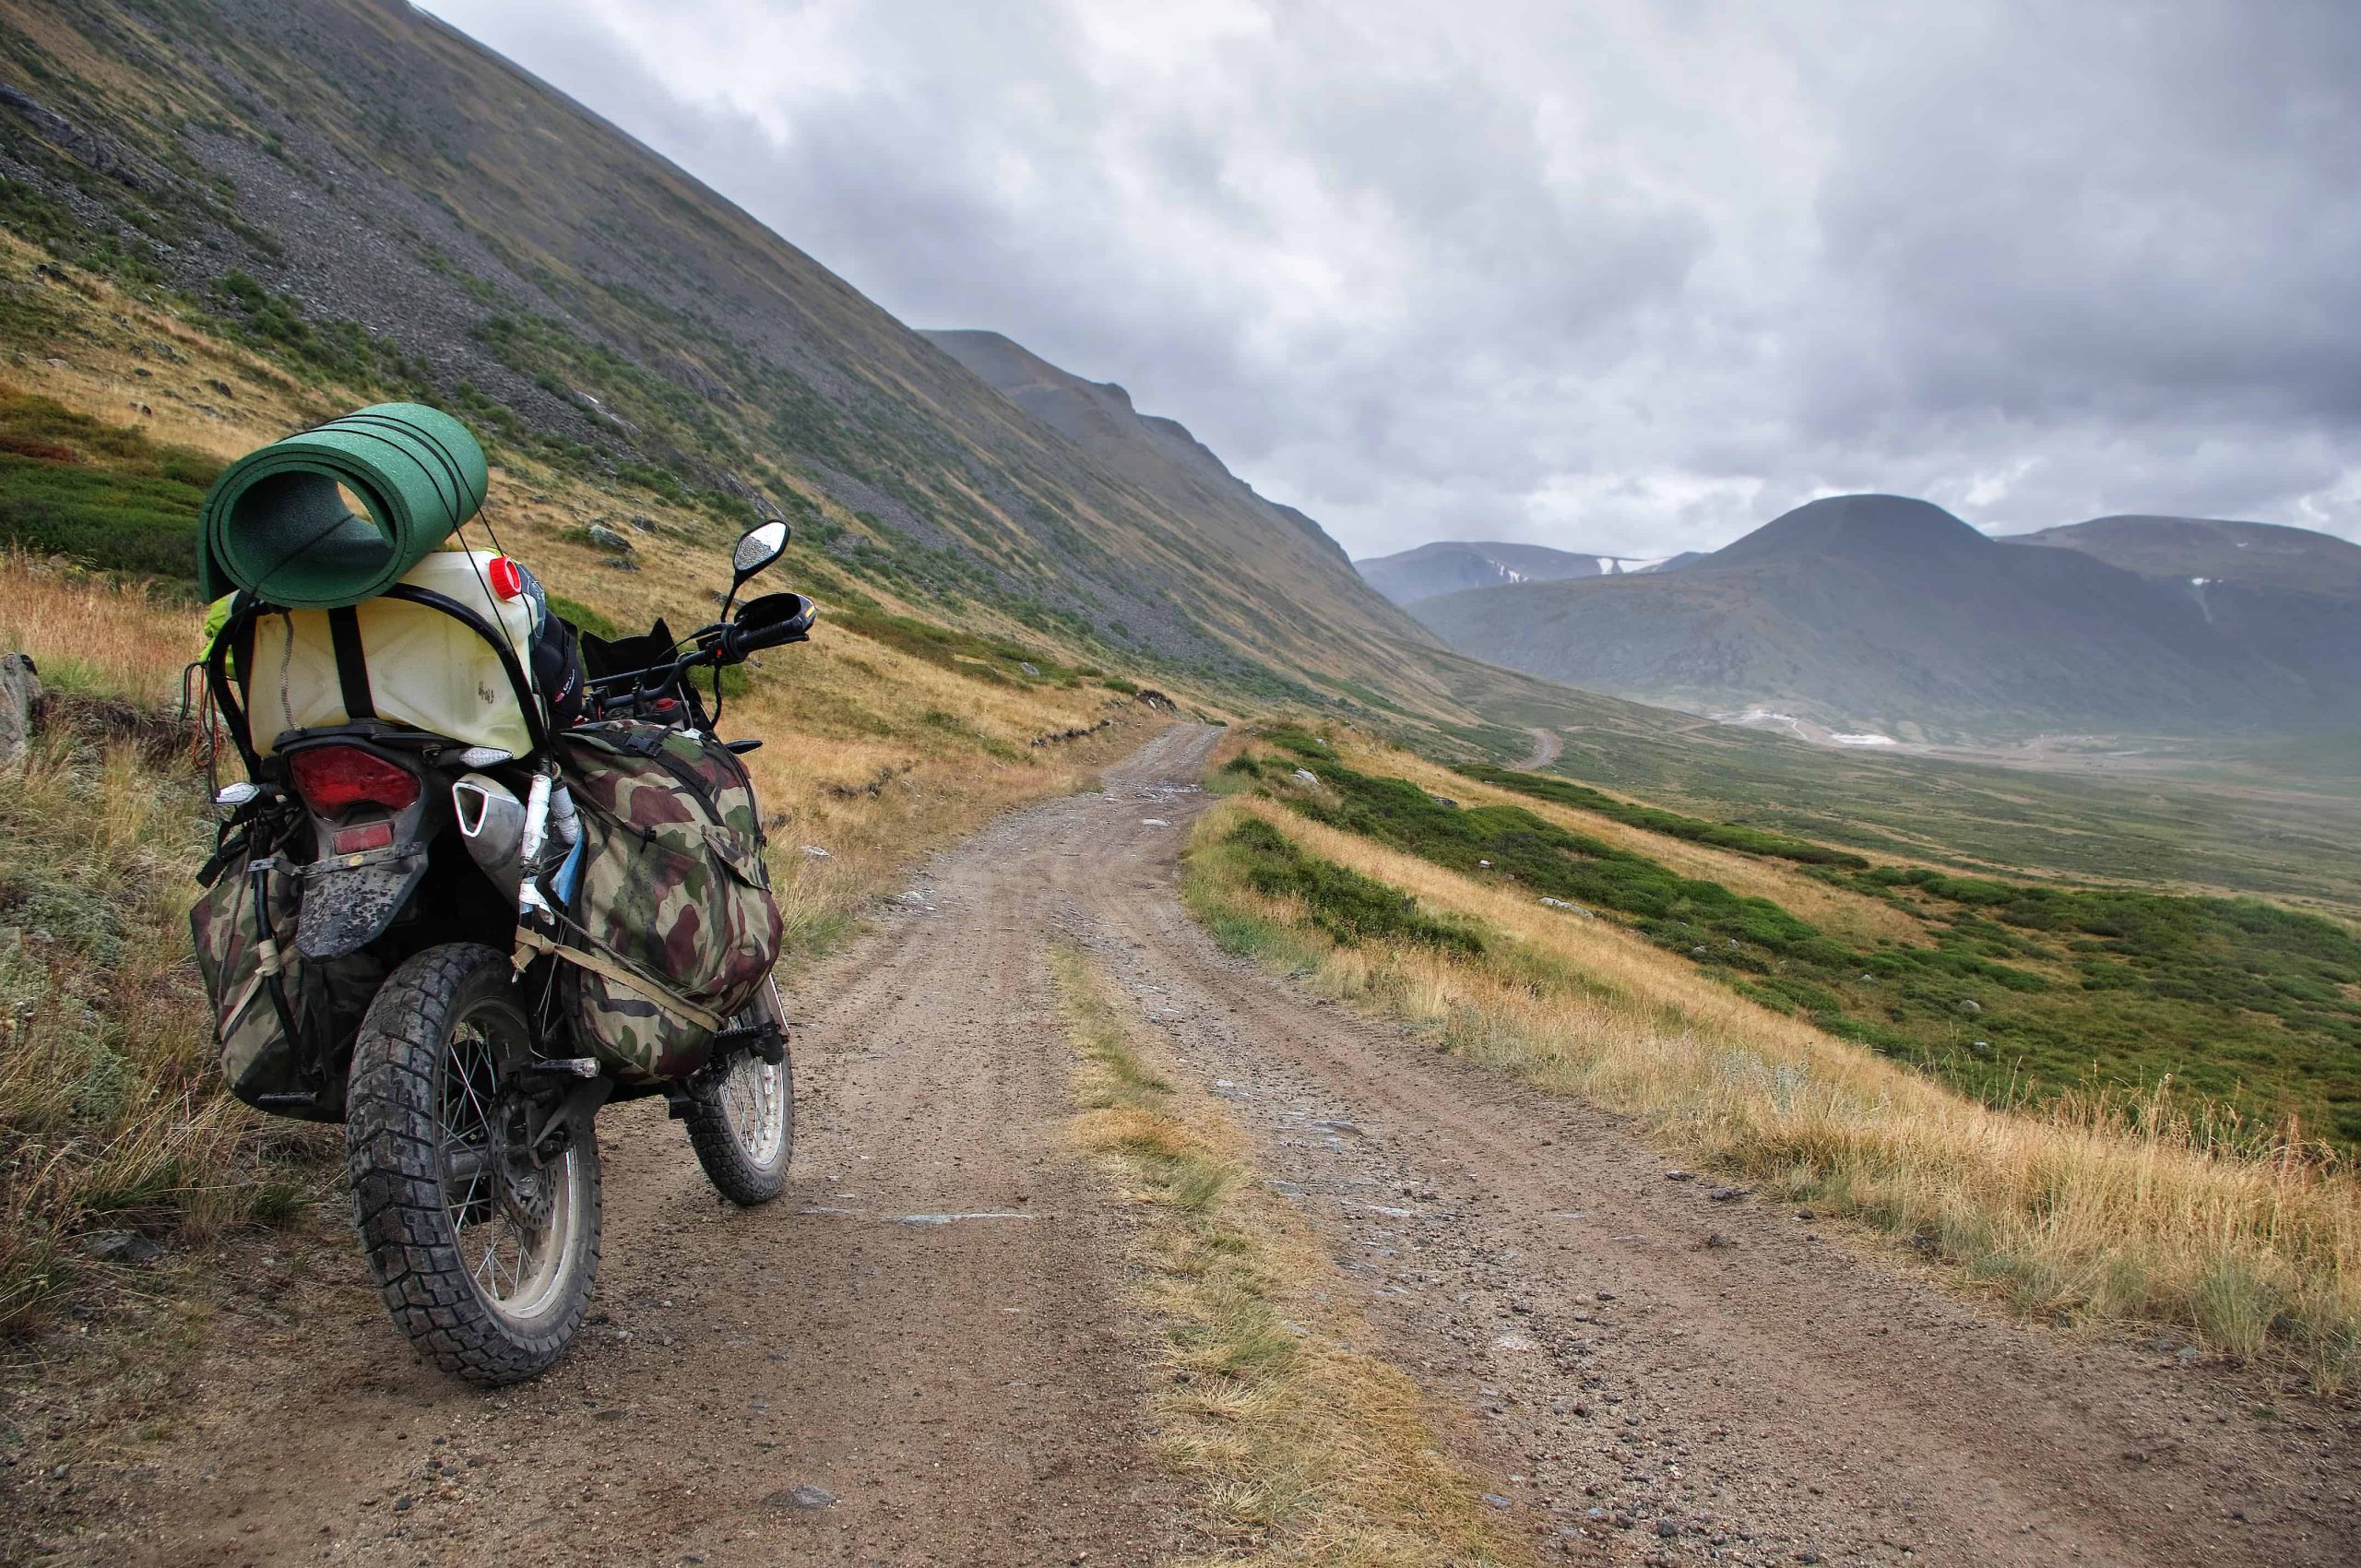 Motorcycle enduro traveler with suitcases standing on extreme rocky road in a mountain valley in cloudy weather on the background of gloom fog mountain ranges.